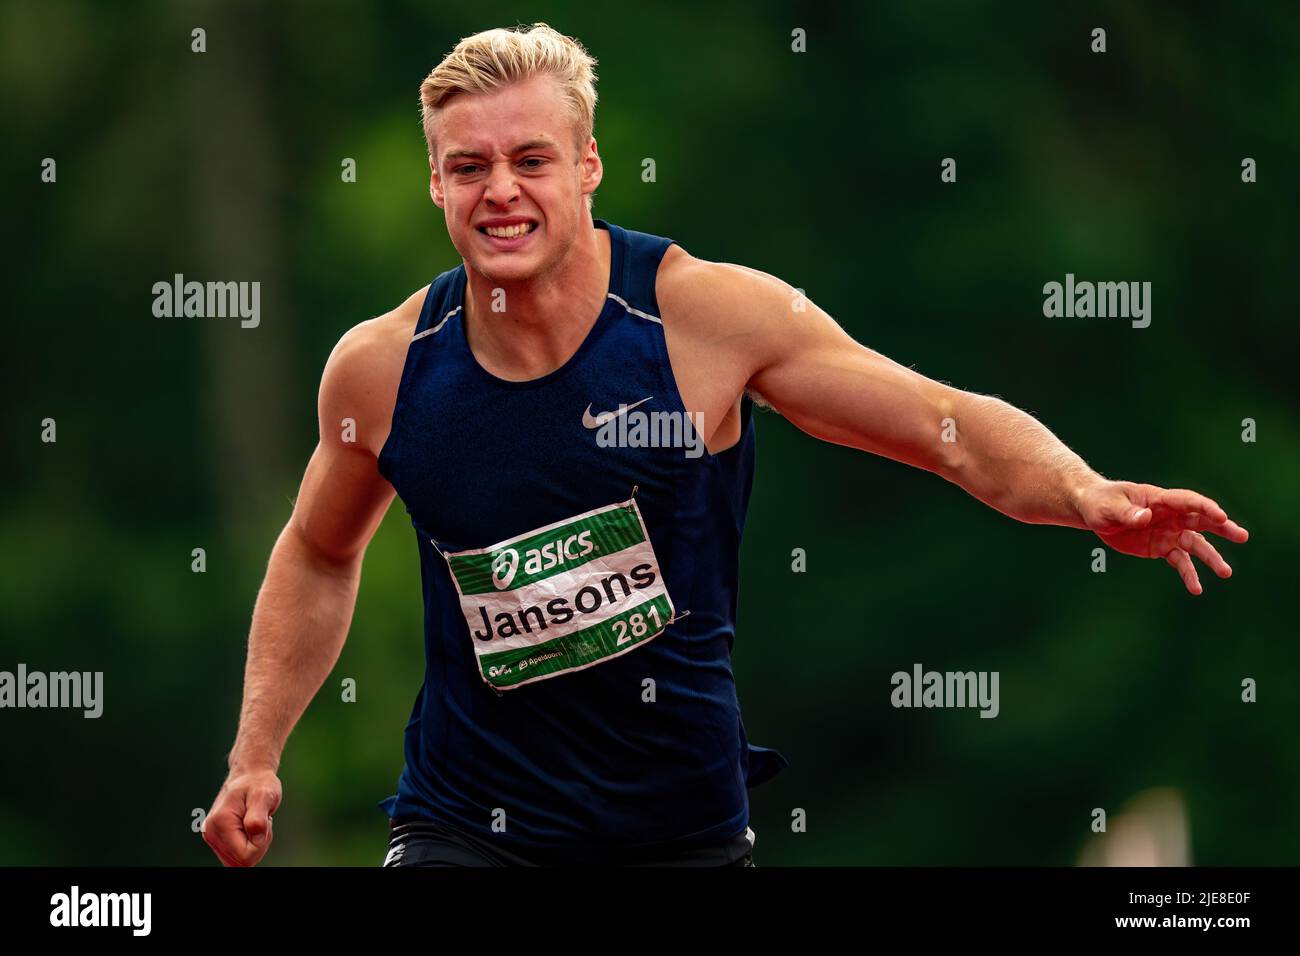 2022-06-26 11:08:49 APELDOORN - Athlete Sven Jansons during the 110 meter  hurdles all-around event at the Dutch Athletics Championships. ANP RONALD  HOOGENDOORN netherlands out - belgium out Stock Photo - Alamy